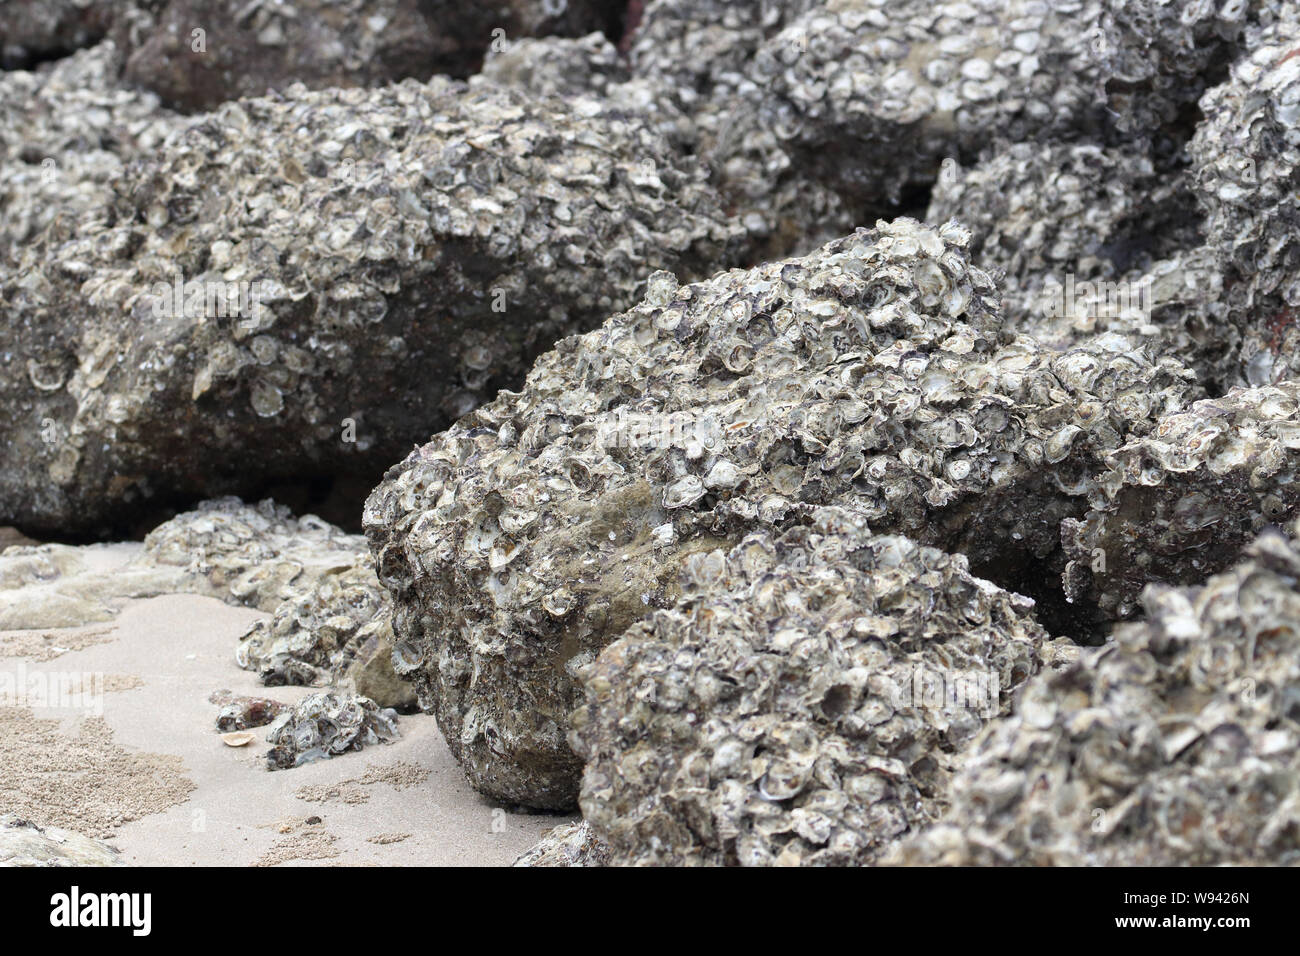 A lot of rock oyster grow on the rock near the sea beach Stock Photo